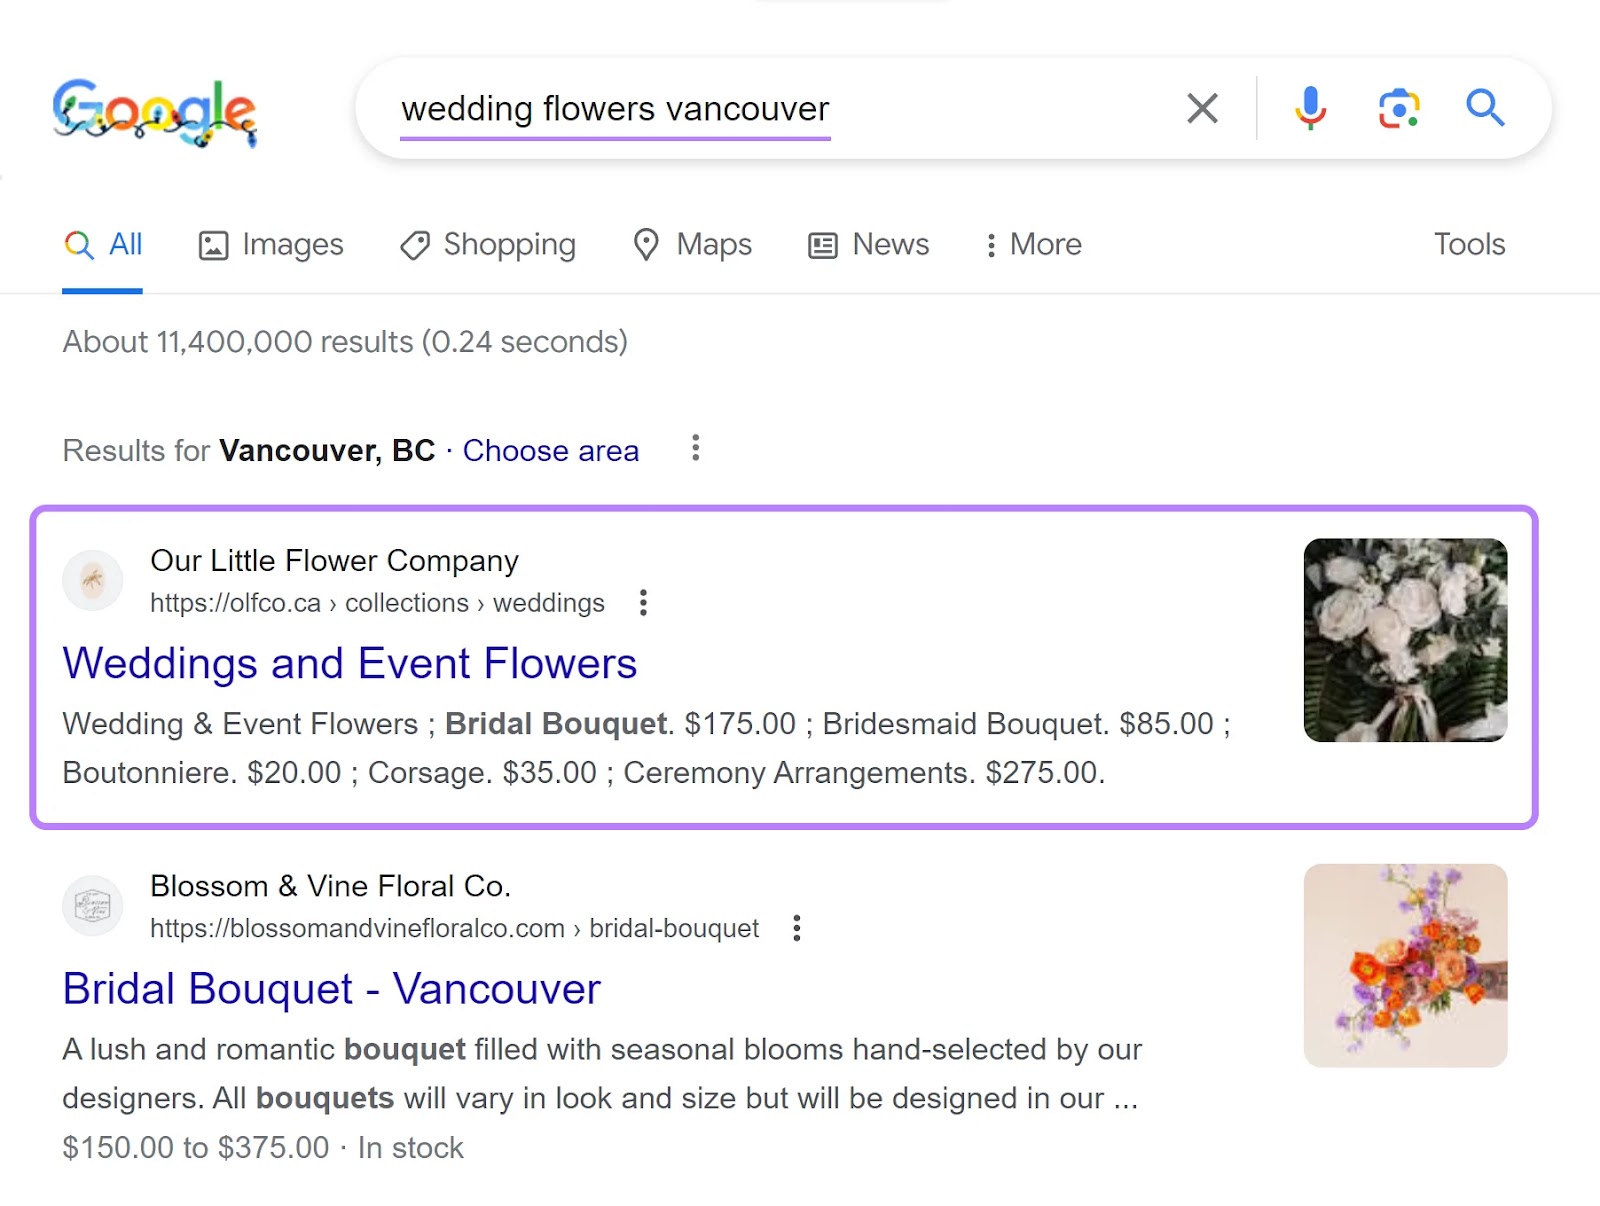 Google search results for "wedding flowers vancouver"